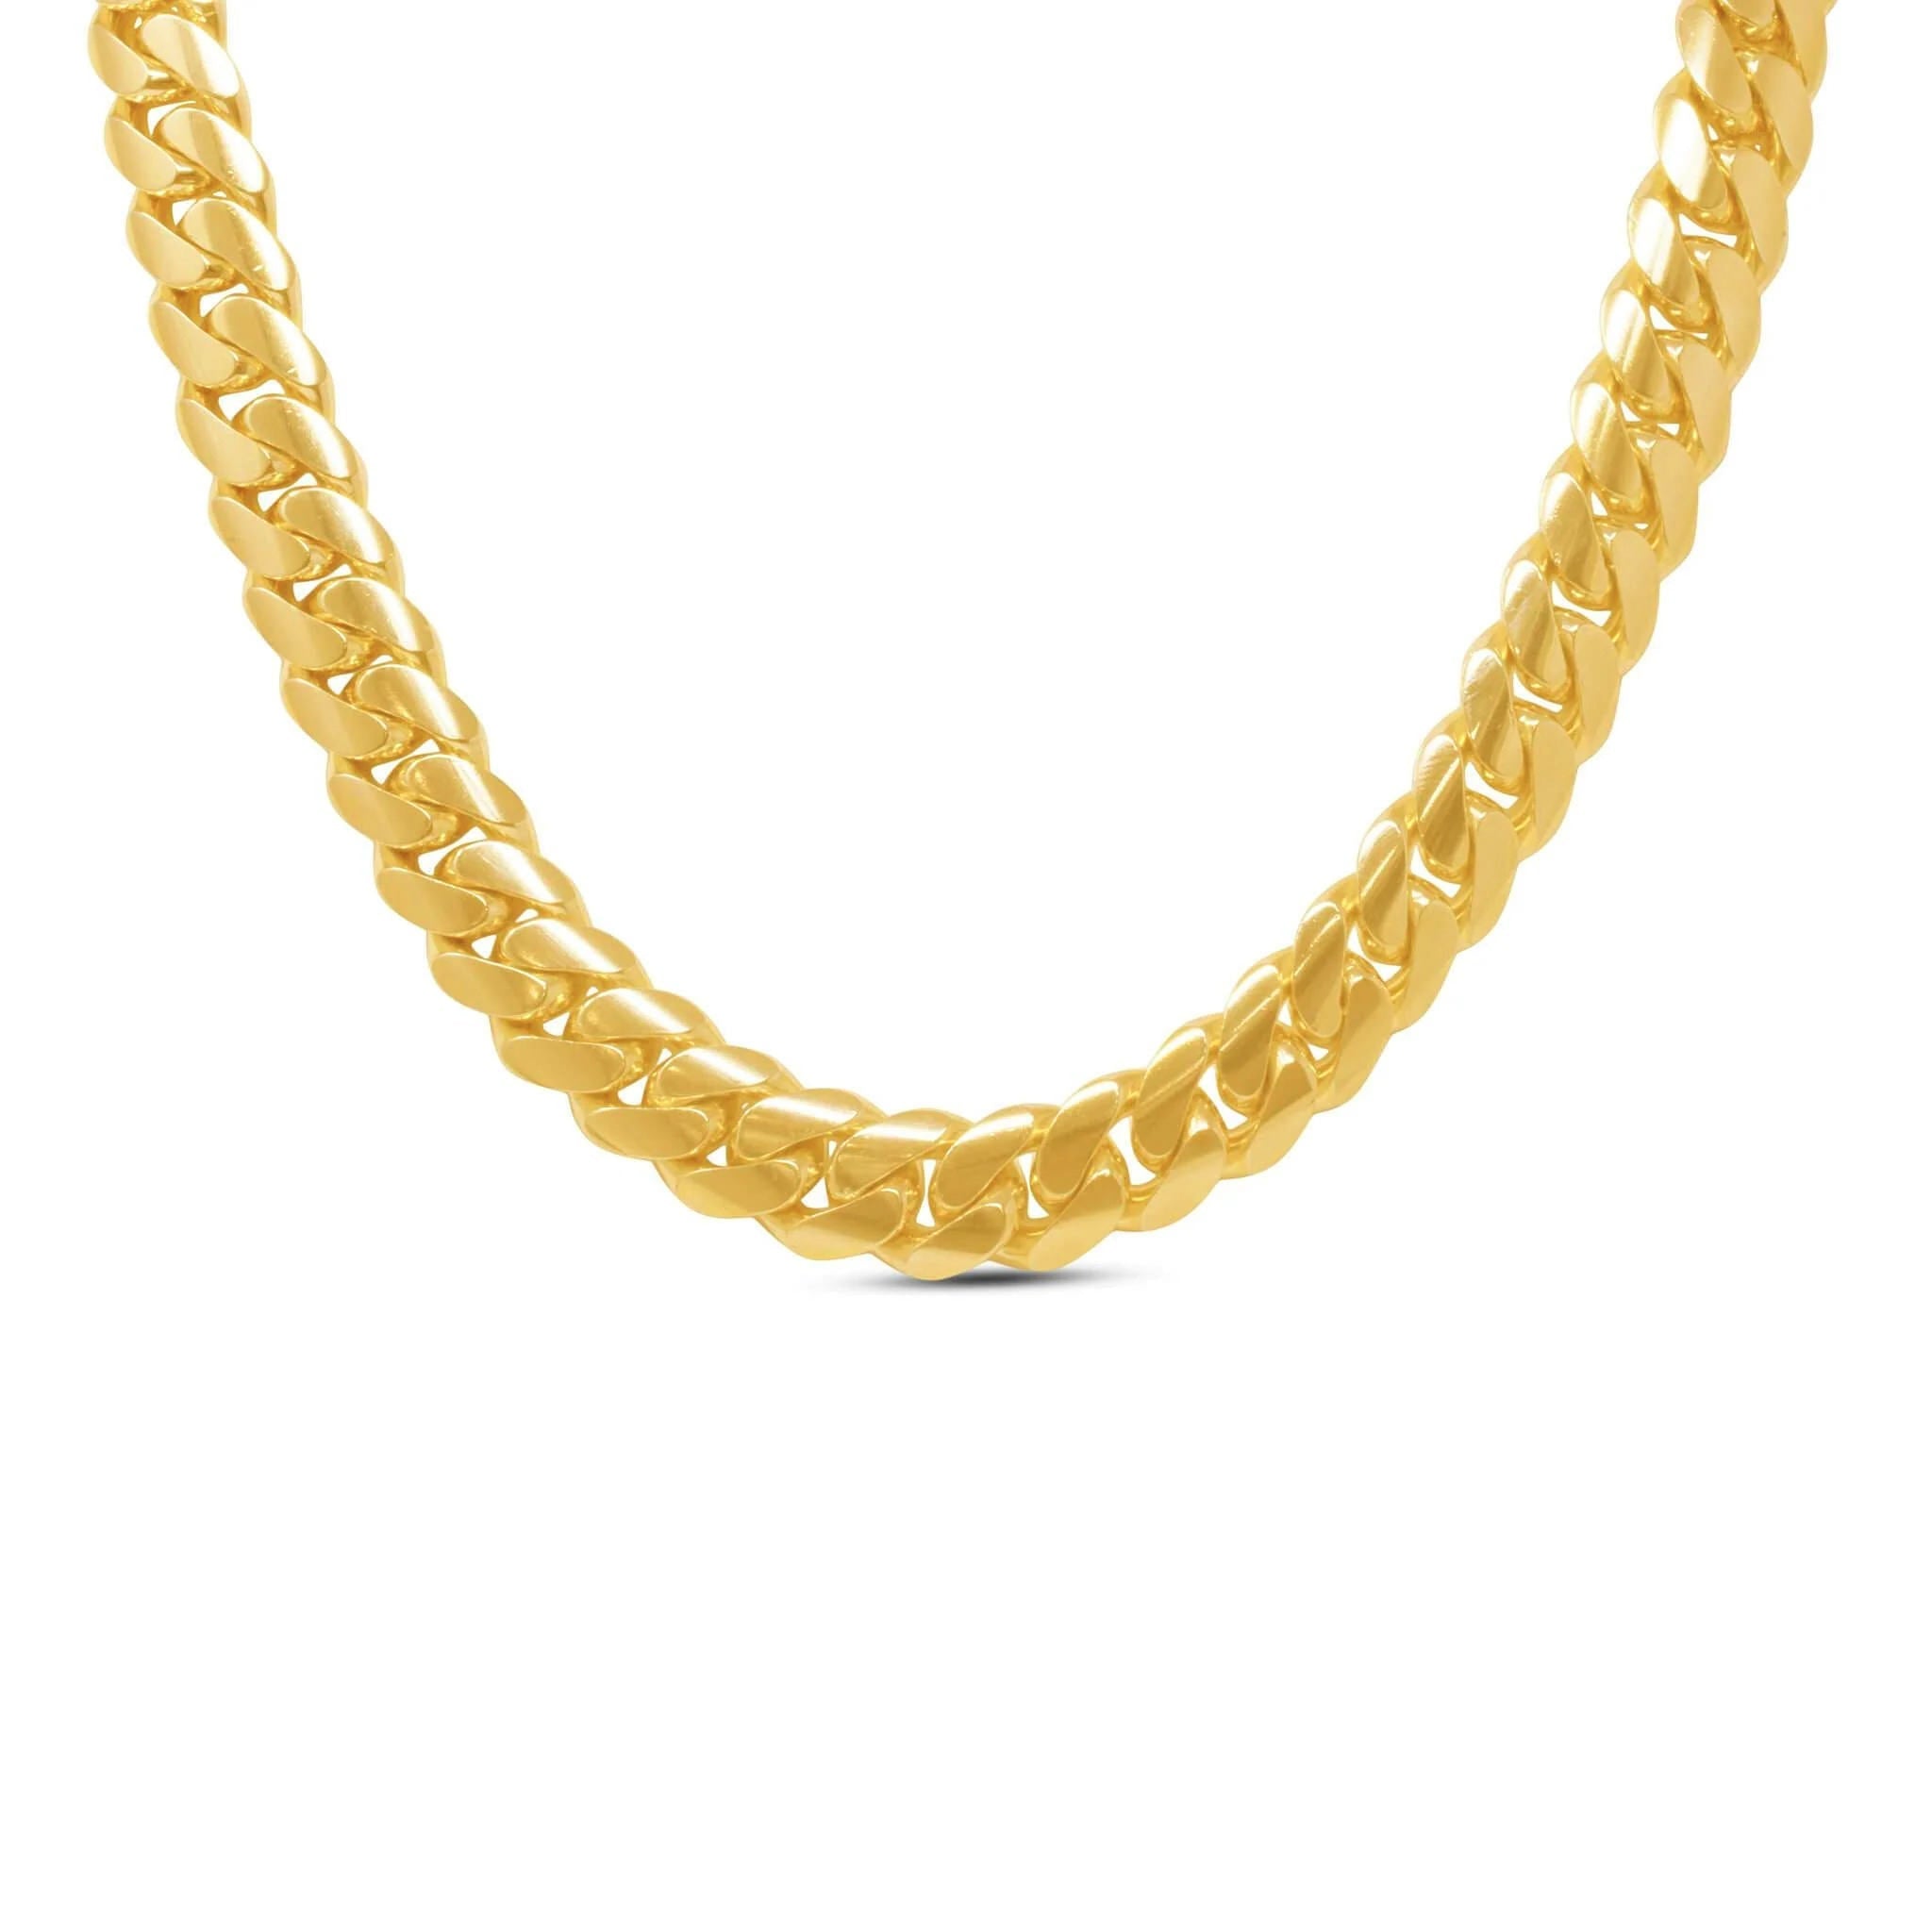 10mm Miami Cuban Link Chain in 14K Solid Yellow Gold